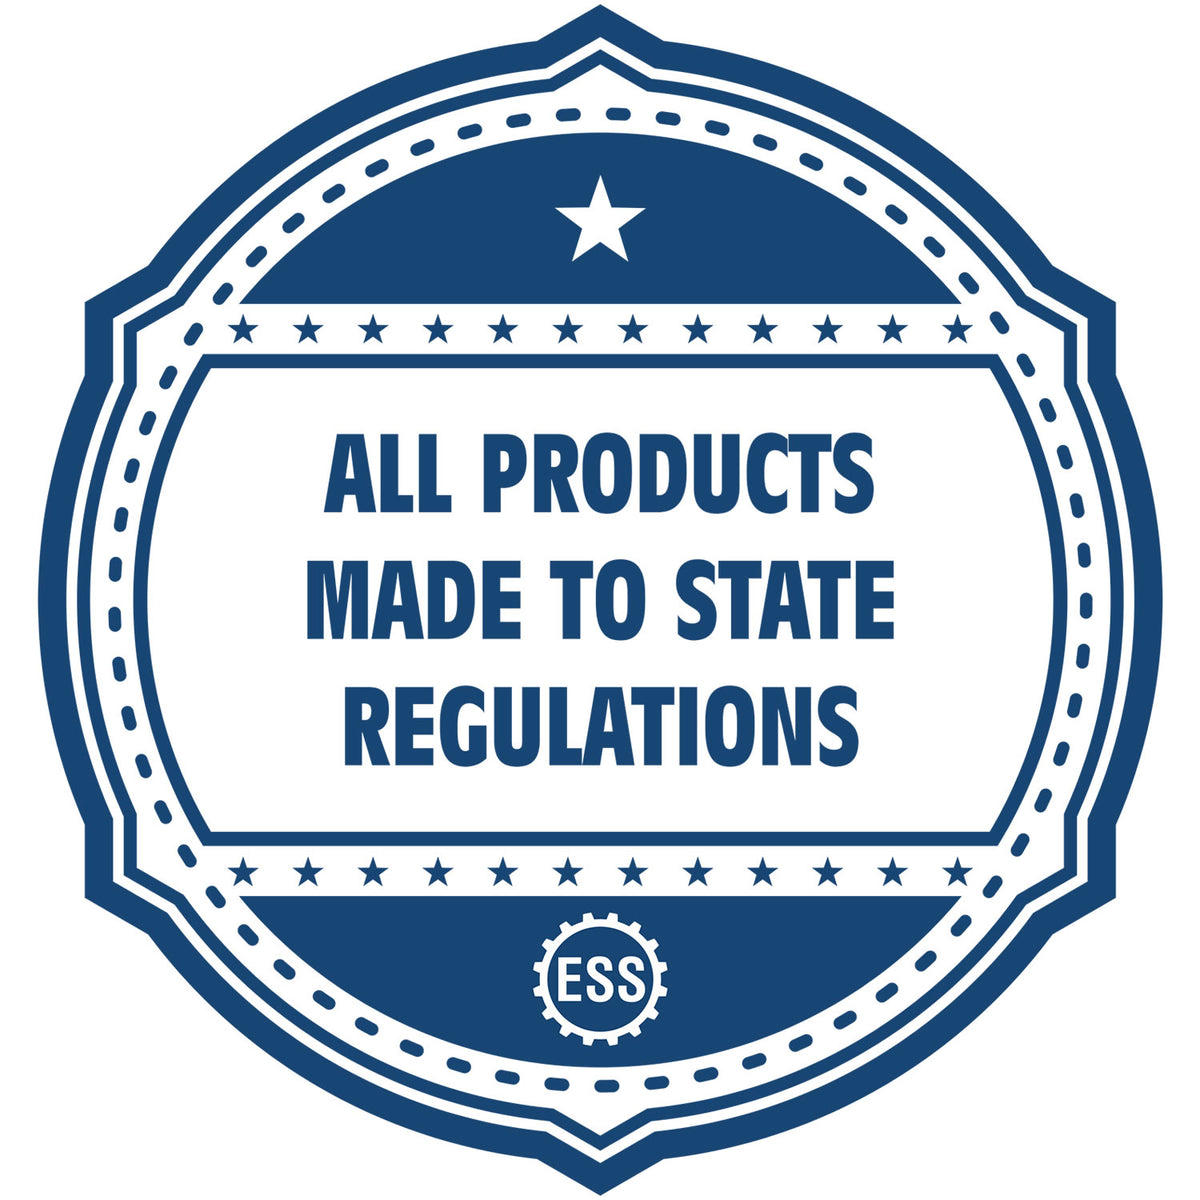 An icon or badge element for the Self-Inking New York PE Stamp showing that this product is made in compliance with state regulations.